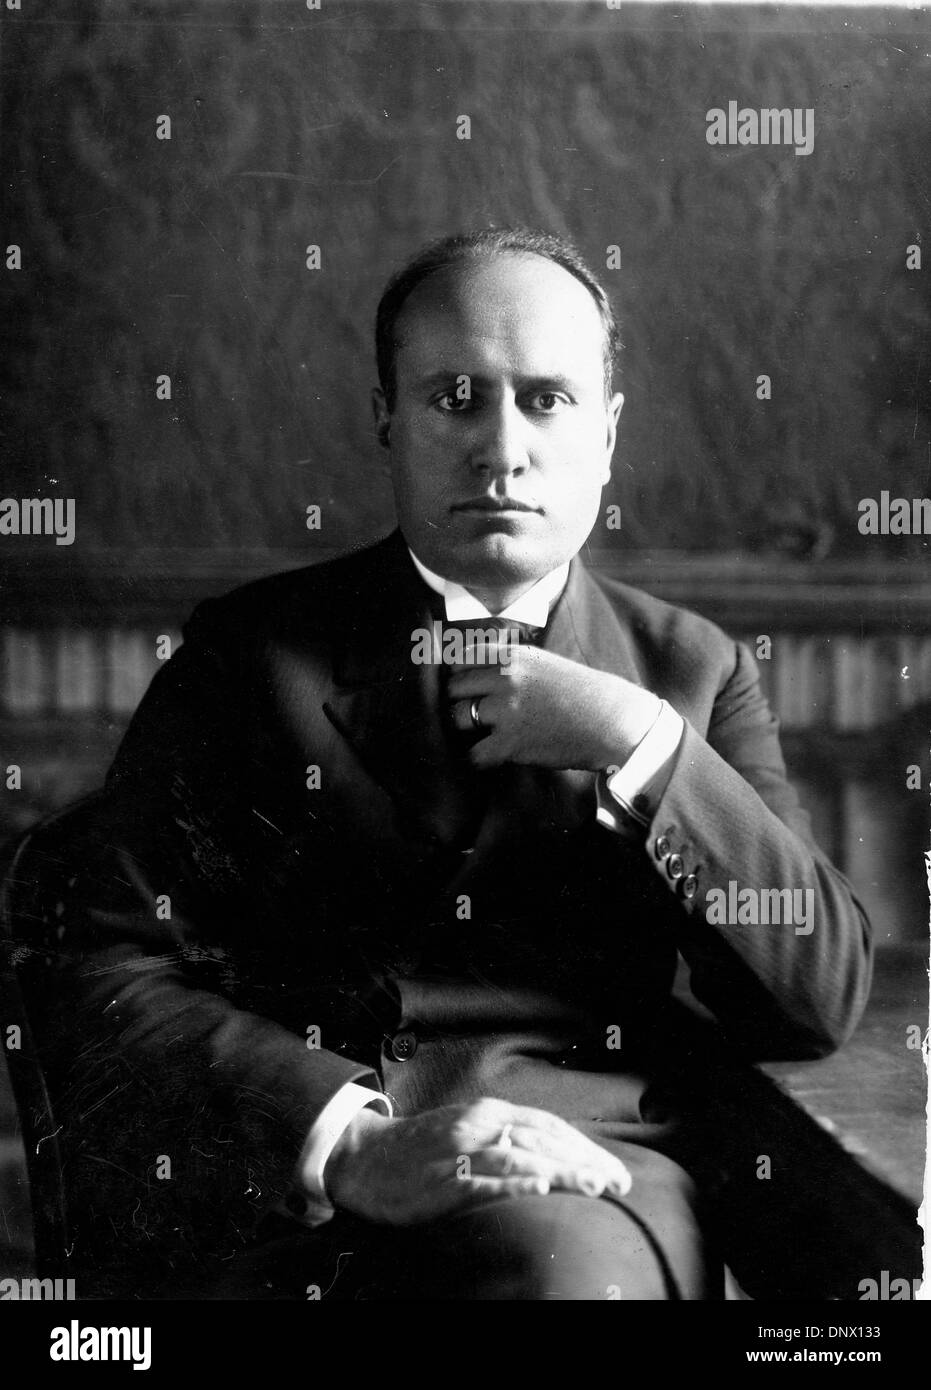 April 27, 1929 - Rome, Iraly - BENITO MUSSOLINI (1883-1945) the Italian dictator and leader of the Fascist movement at his desk at the Ministry of Foreign Affairs. (Credit Image: © KEYSTONE Pictures/ZUMAPRESS.com) Stock Photo